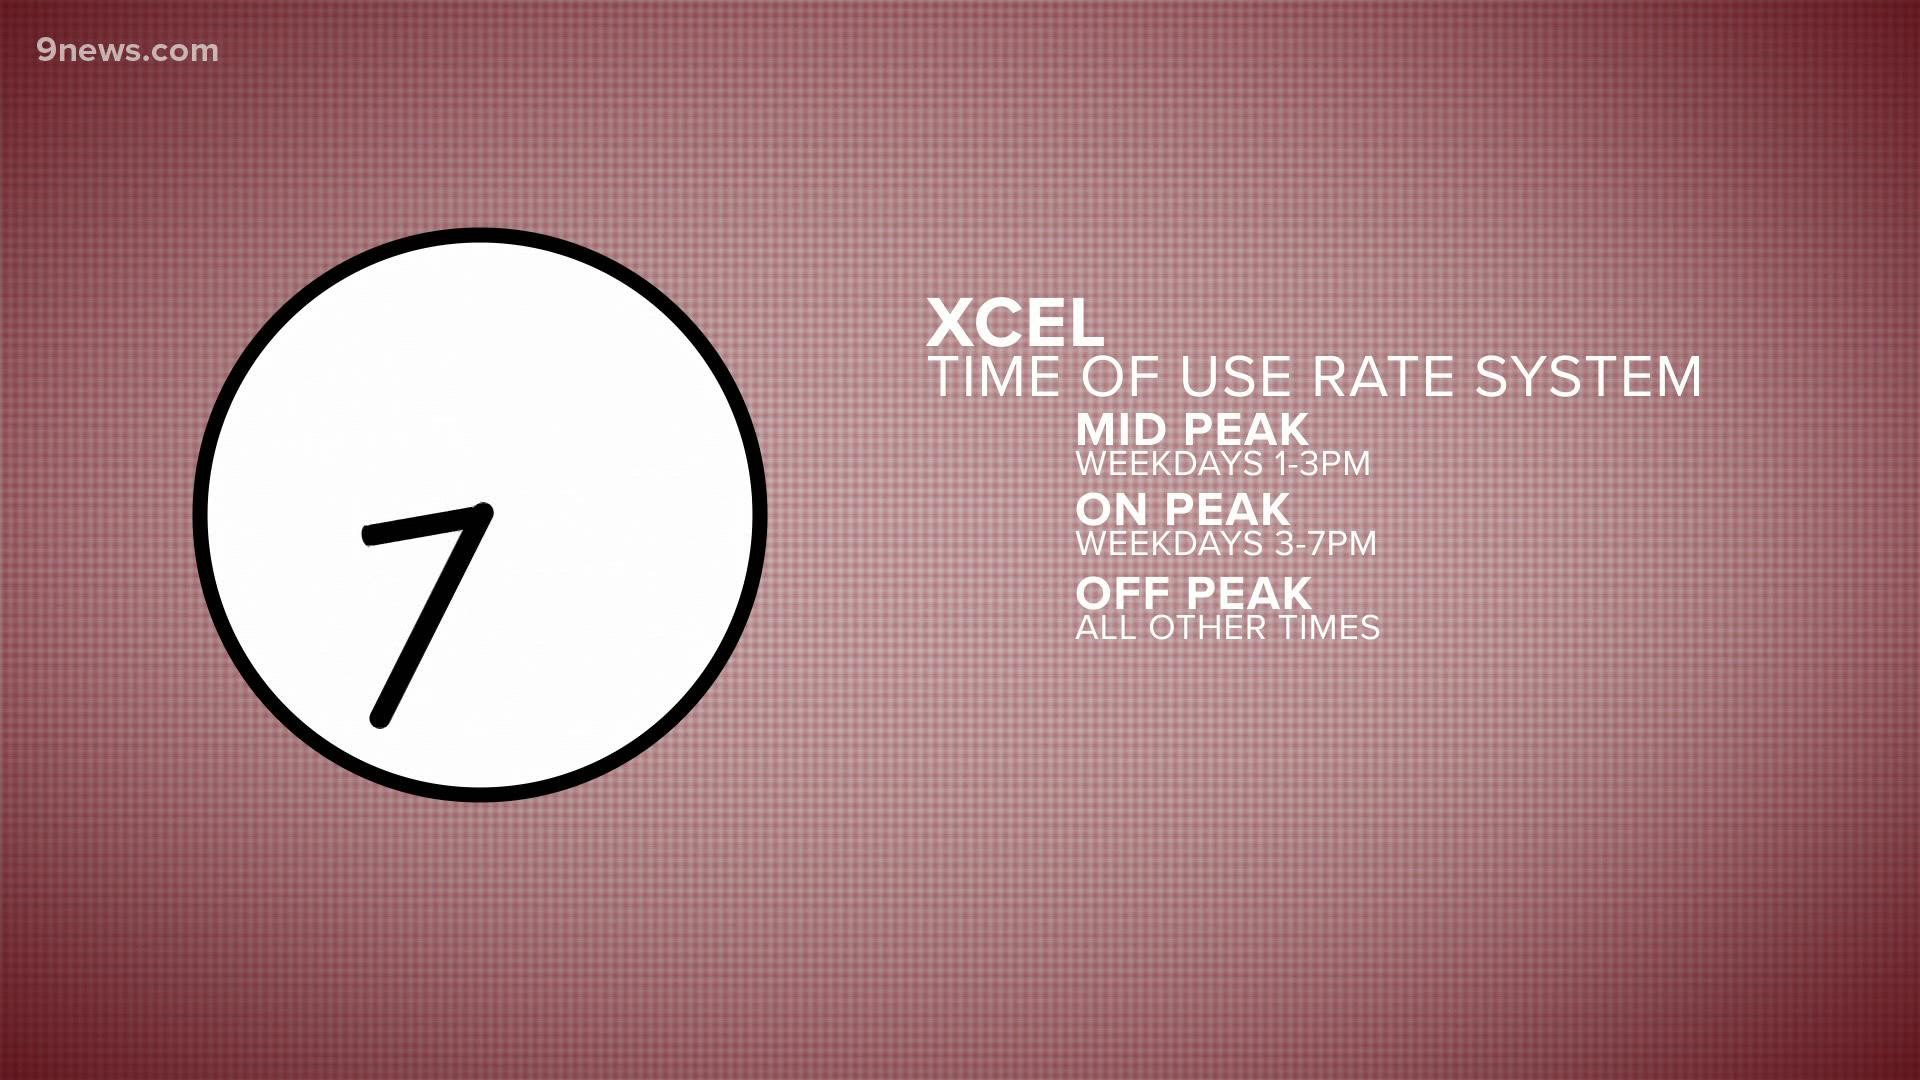 Xcel is about to change the way it charges you. It may be cheaper or more expensive to do your laundry run your dishwasher based on the time of day.